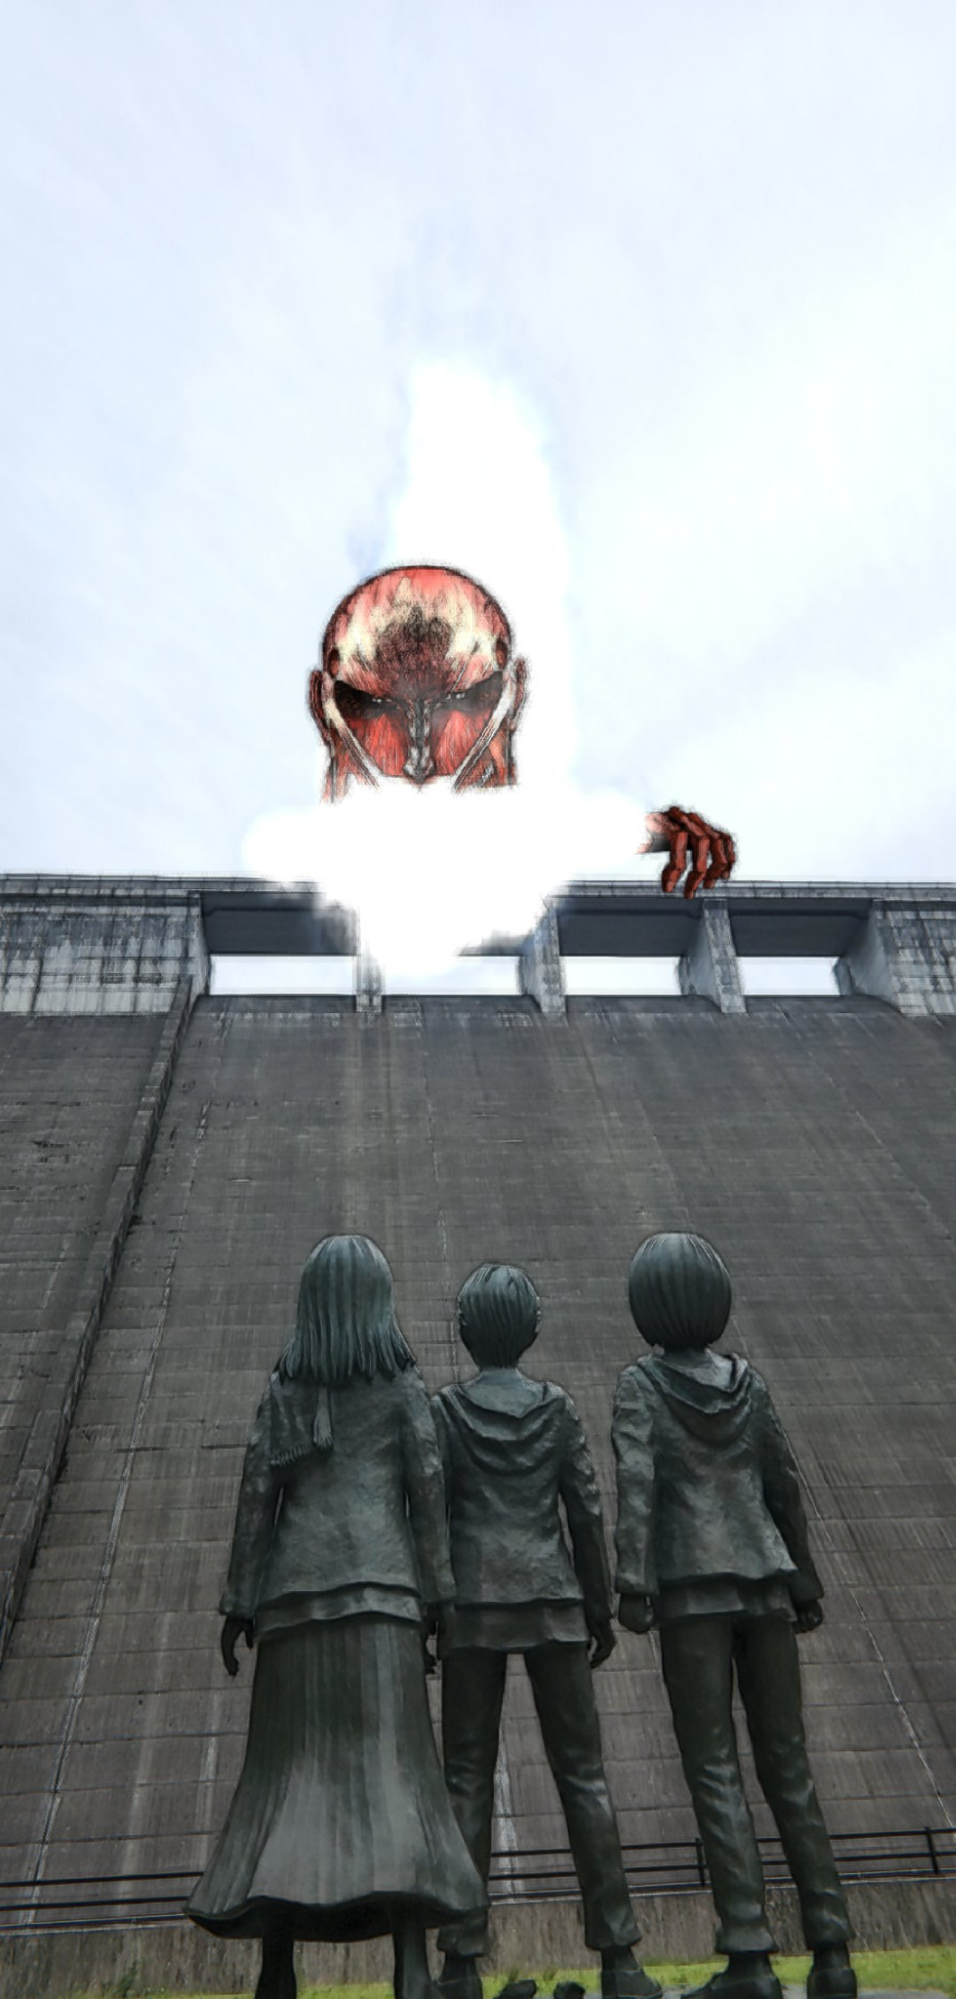 Attack on Titan in real life - AR app with colossal titan